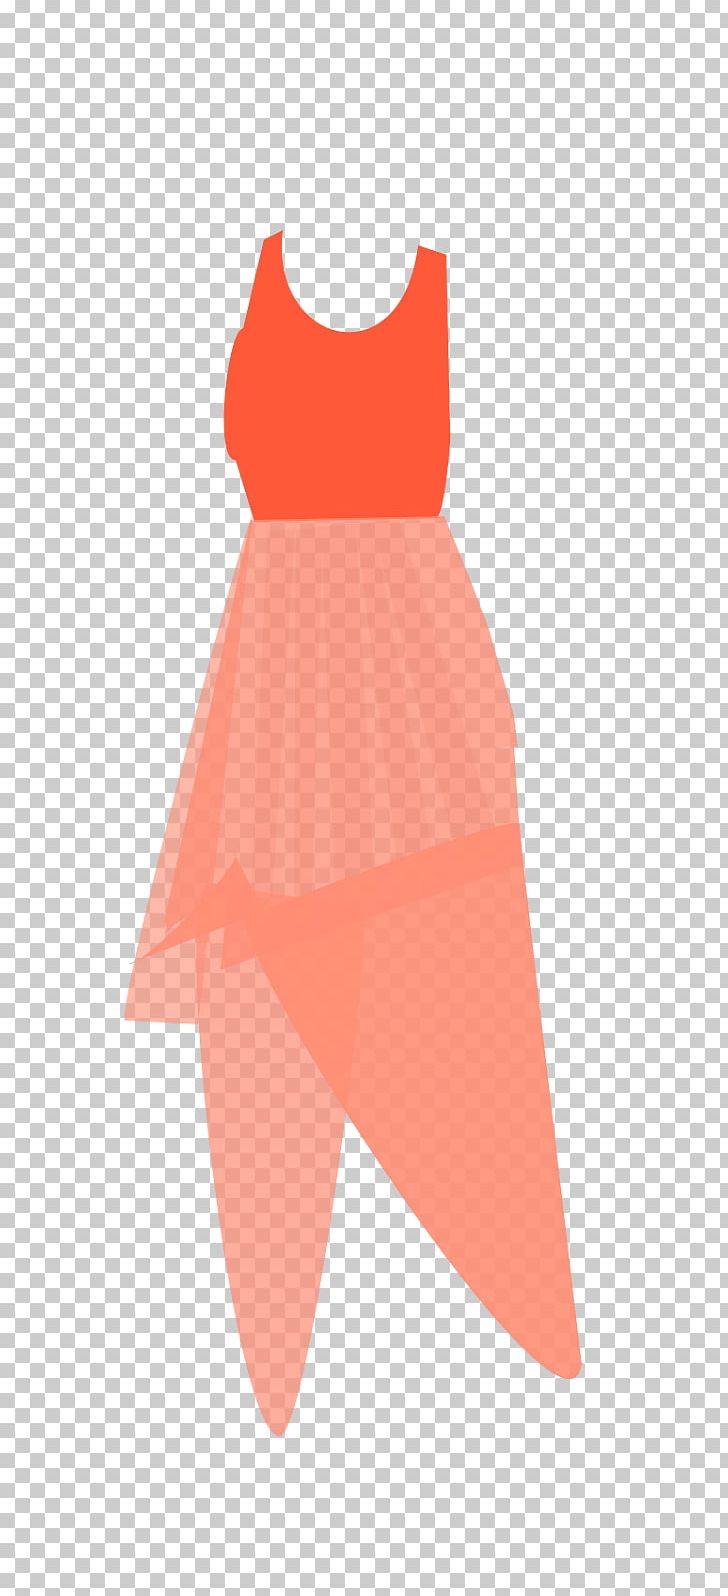 Gown Paper doll Dress Toy, doll, fashion, fashion Illustration png | PNGEgg